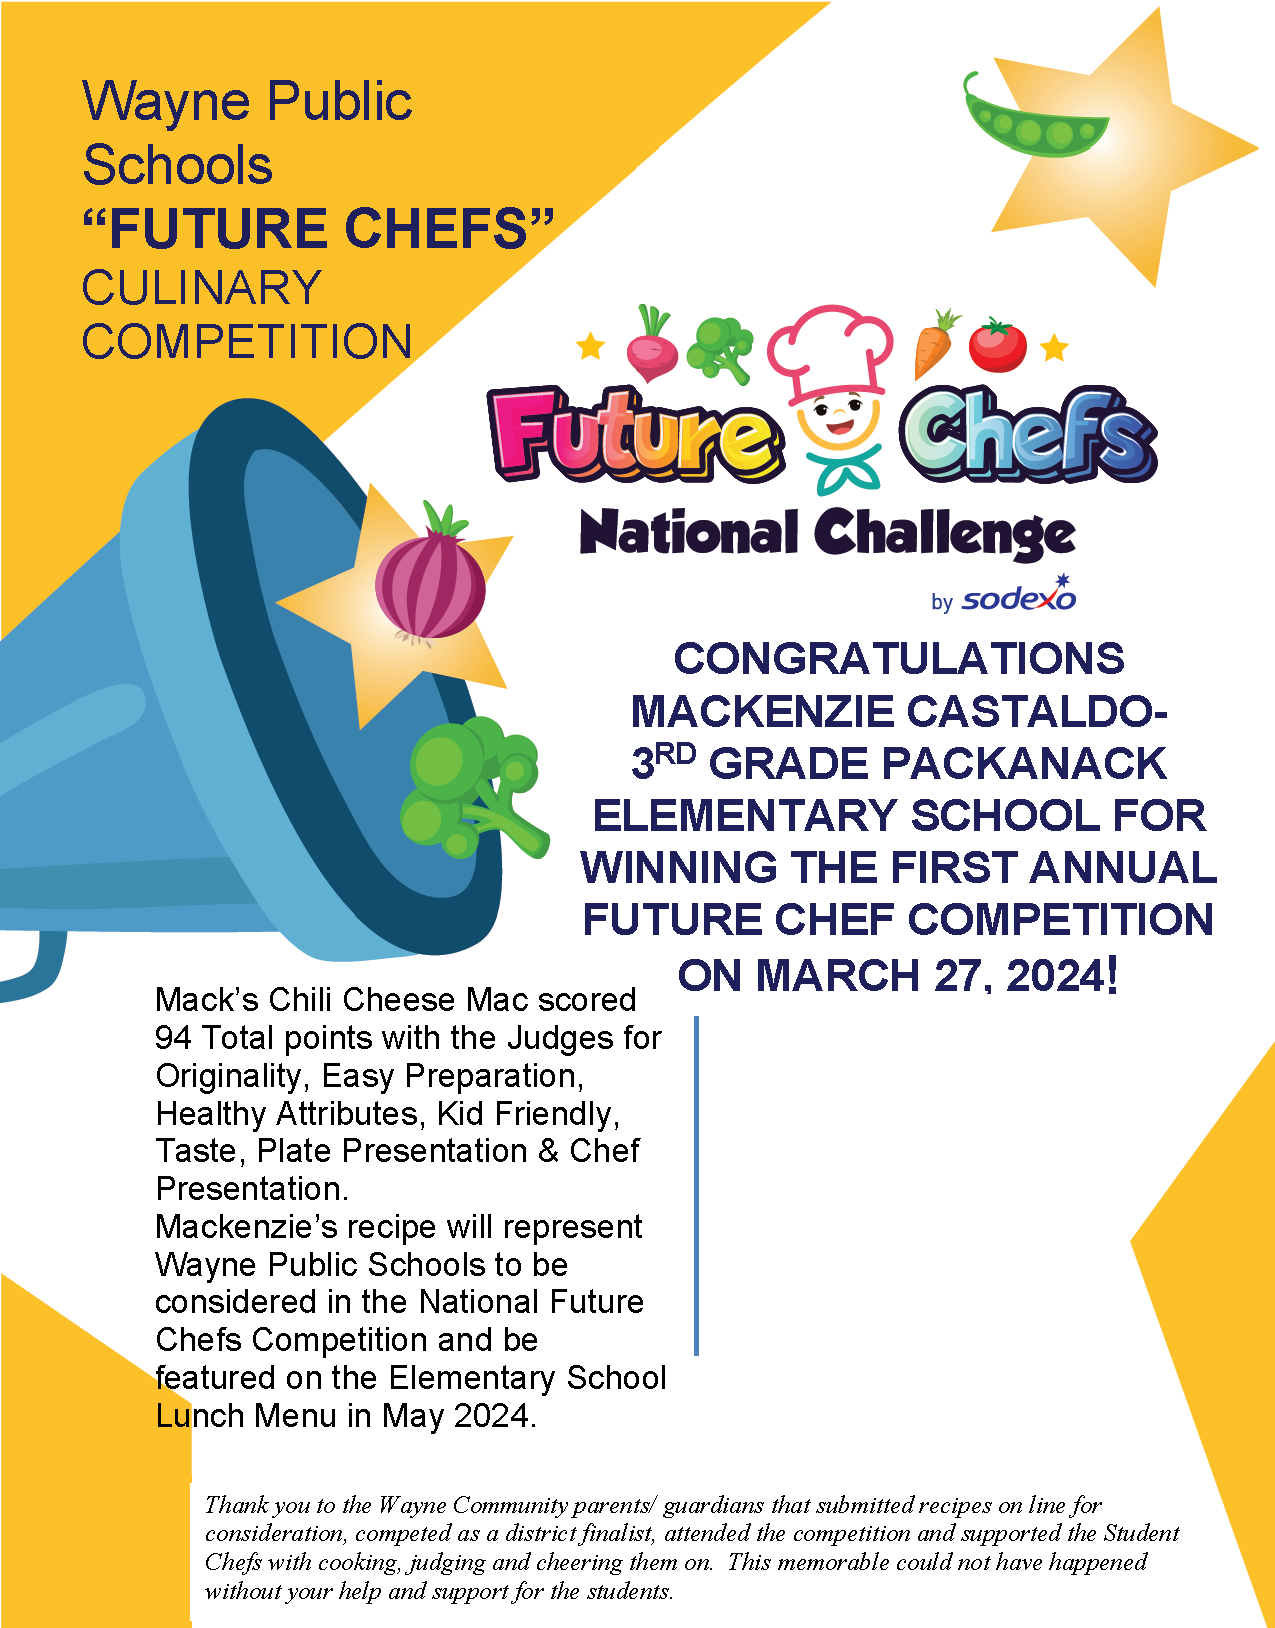 Congratulations to MACKENZIE CASTALDO (3rd grade at Packanack Elementary school) for winning the First Annual Future Chef Competition on March 27, 2024!   Mack's Chili Cheese Mac scored 94 total points with the judges for Originality, Easy Preparation, Healthy Attributes, Kid Friends, Taste, Plate Presentation & Chef Presentation.   Mackenzie's recipe will represent Wayne Public Schools to be considered in the National Future Chefs Competition and be featured on the Elementary School Lunch Menu in May 2024.